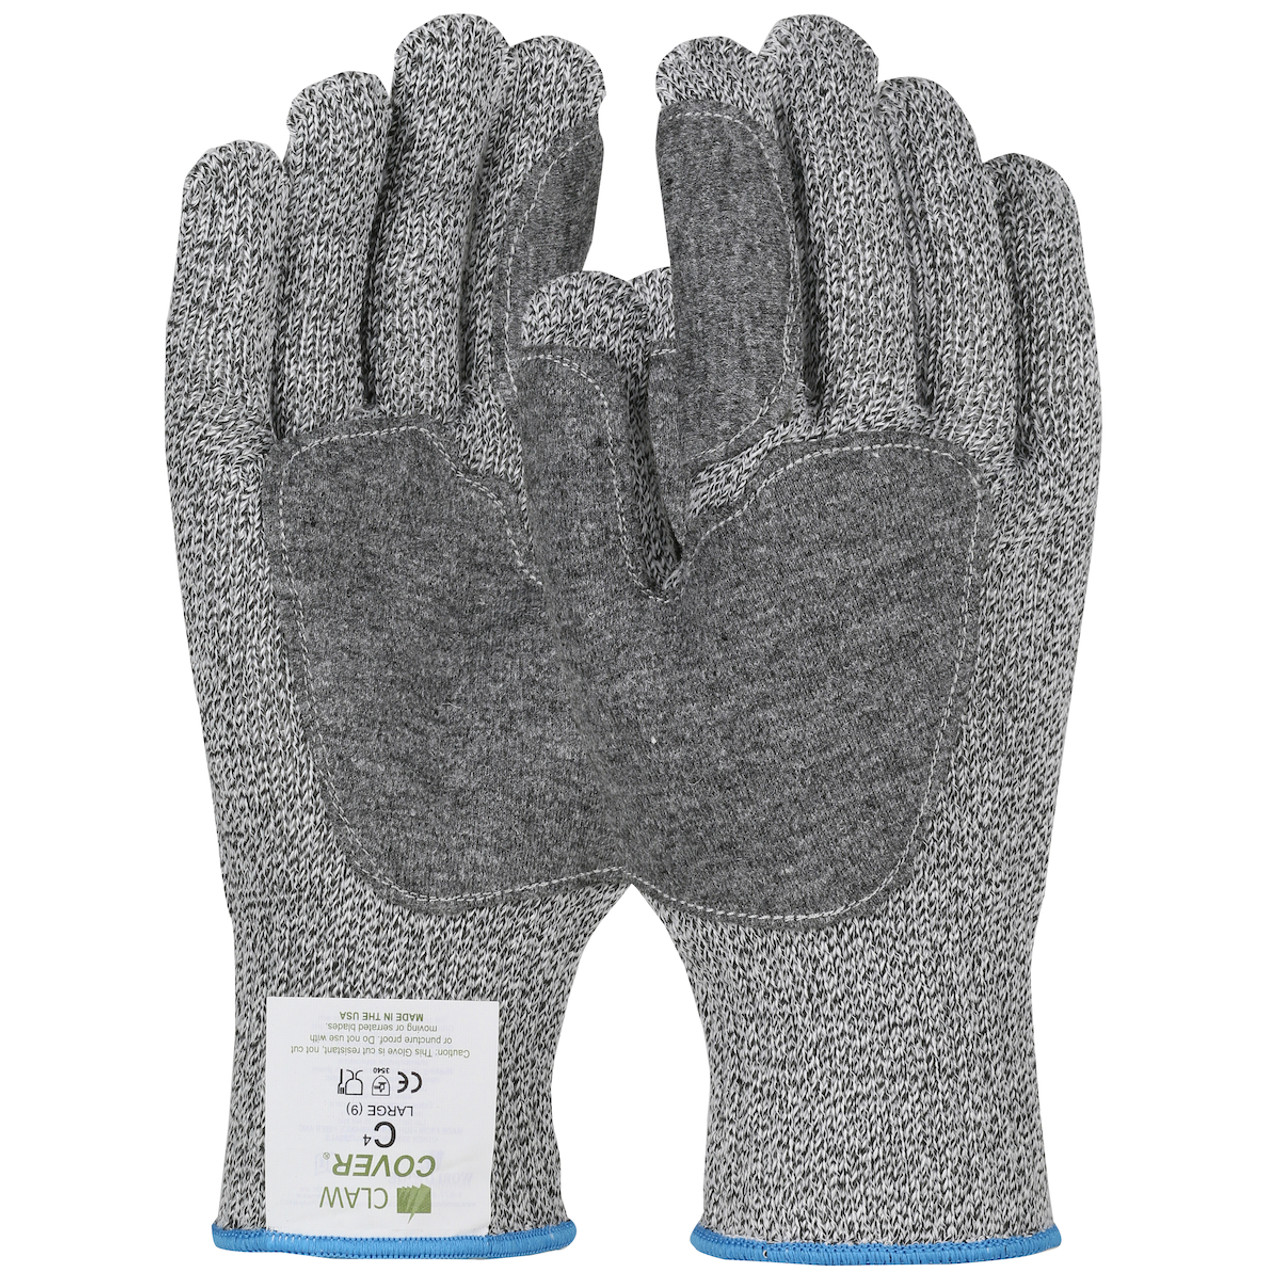 Wpp-Glove, Claw Cover Deboning 7G - Size M, Gray, Cut Resistant Gloves, 1  Unit CC-D3-M - First Industrial Supplies